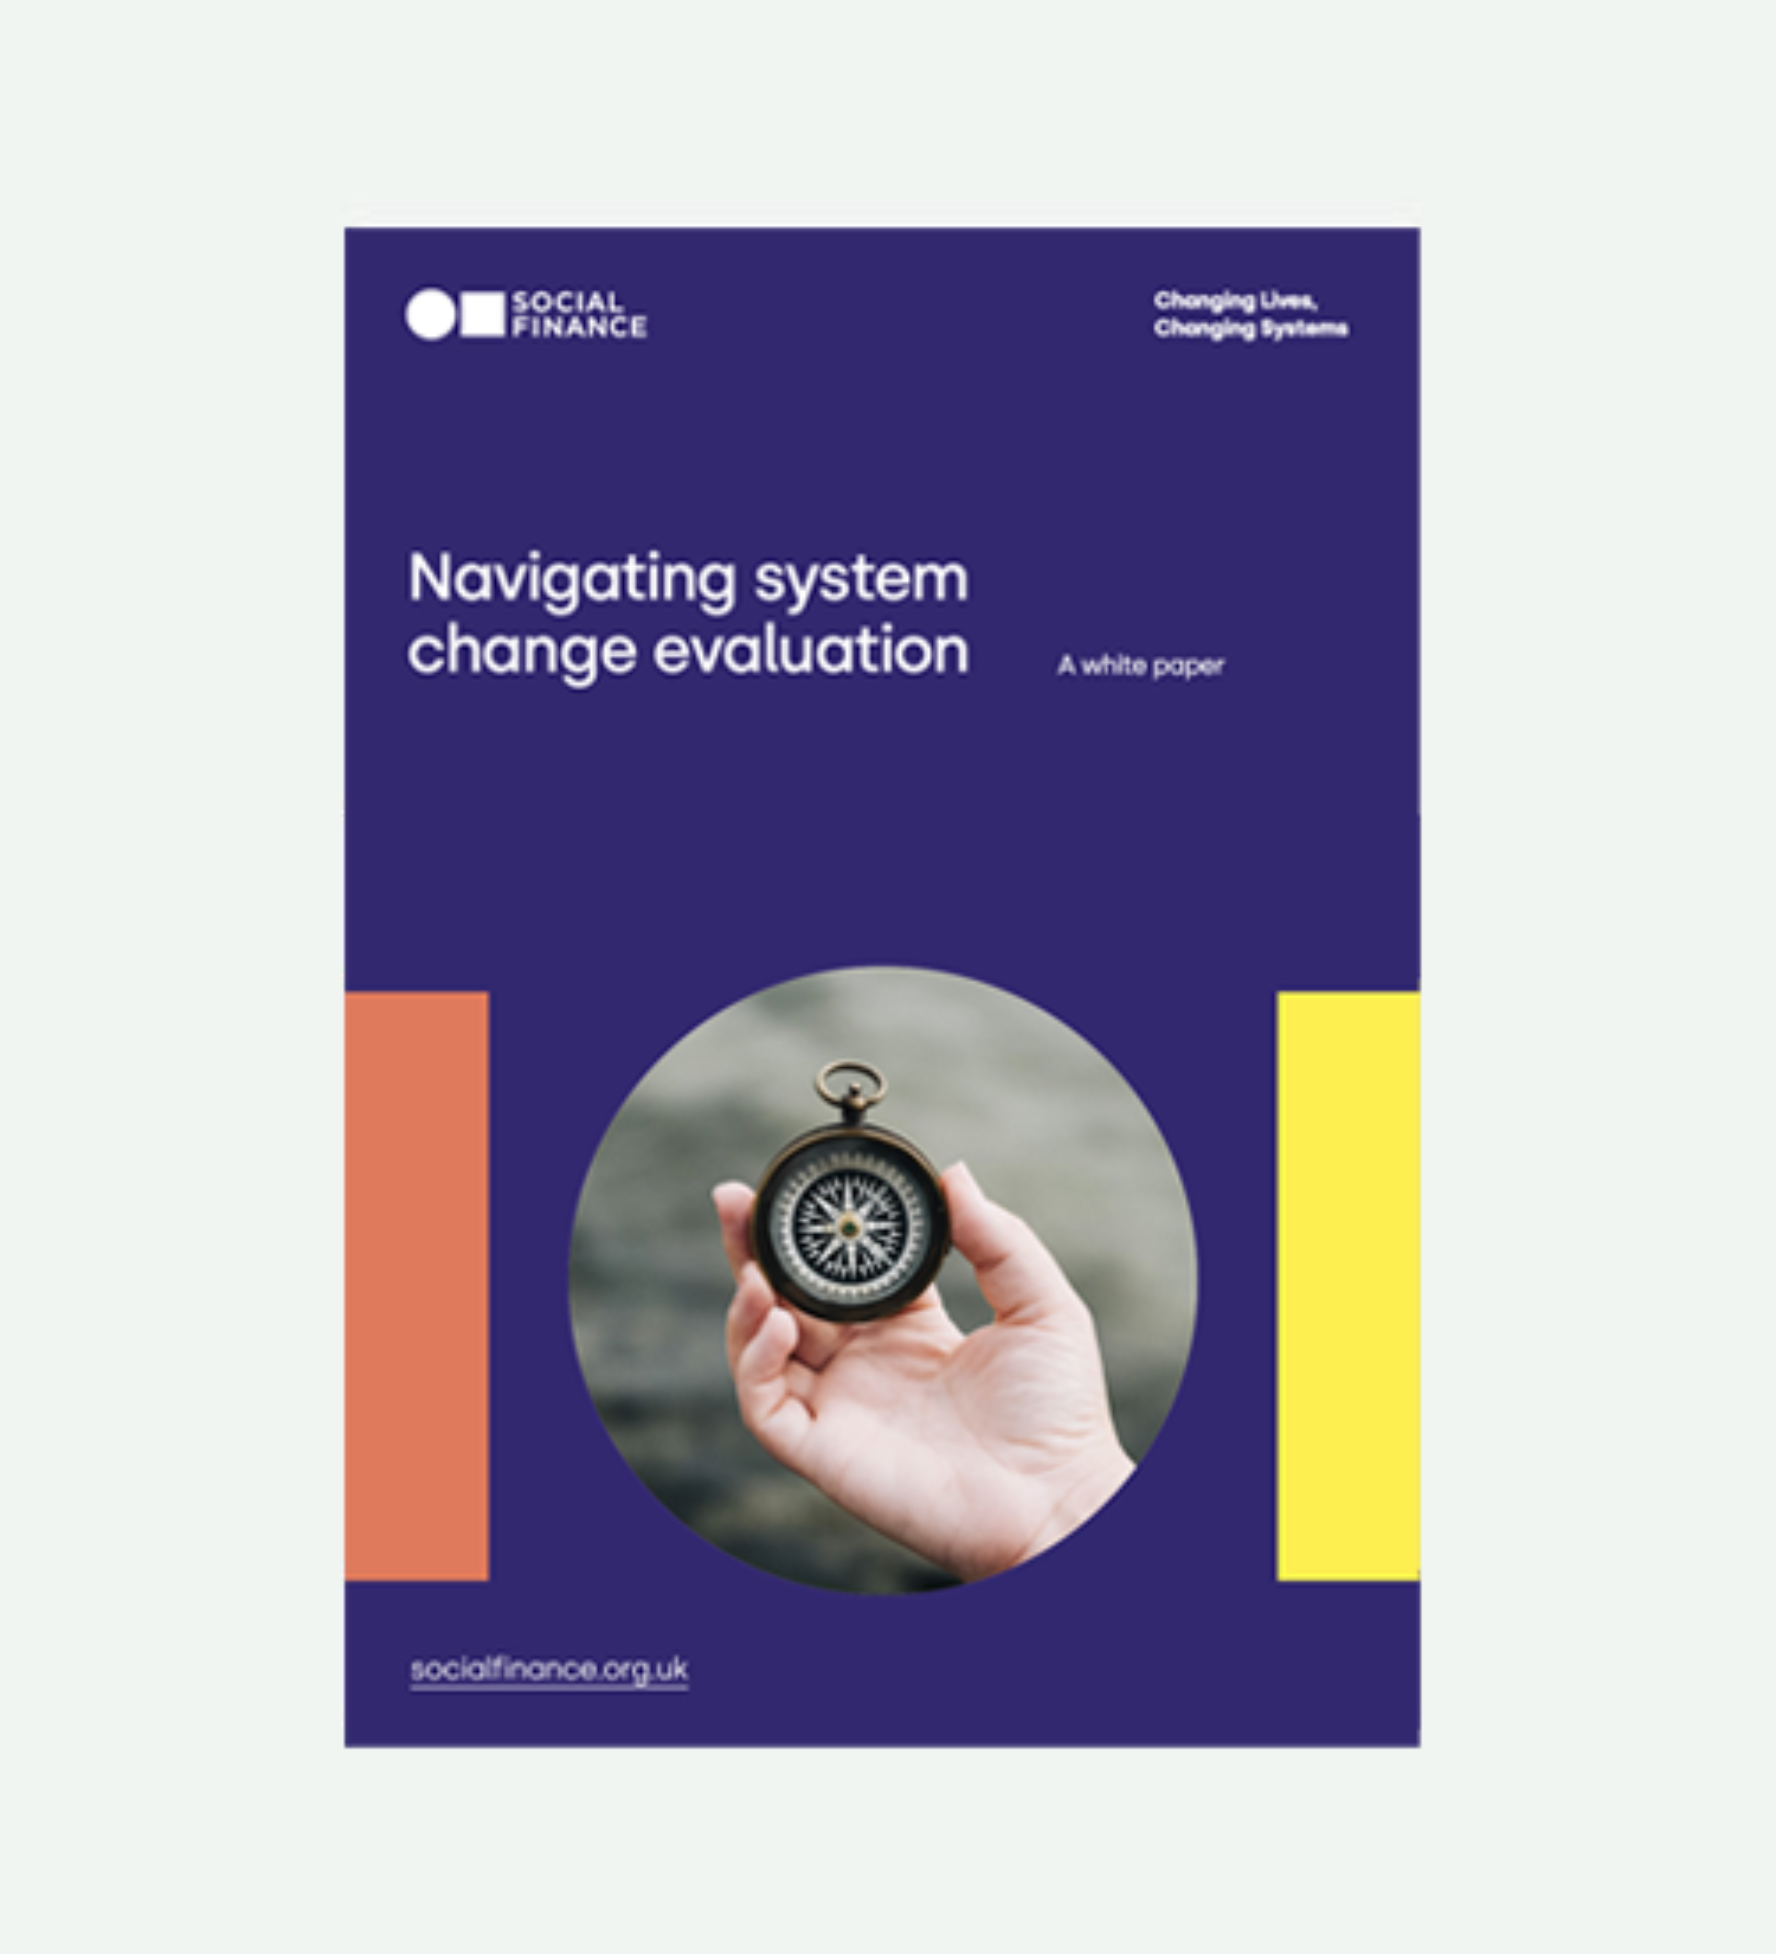 The cover of a report titled 'Navigating system change evaluation: A white paper', decorated with an image of a hand holding a compass.